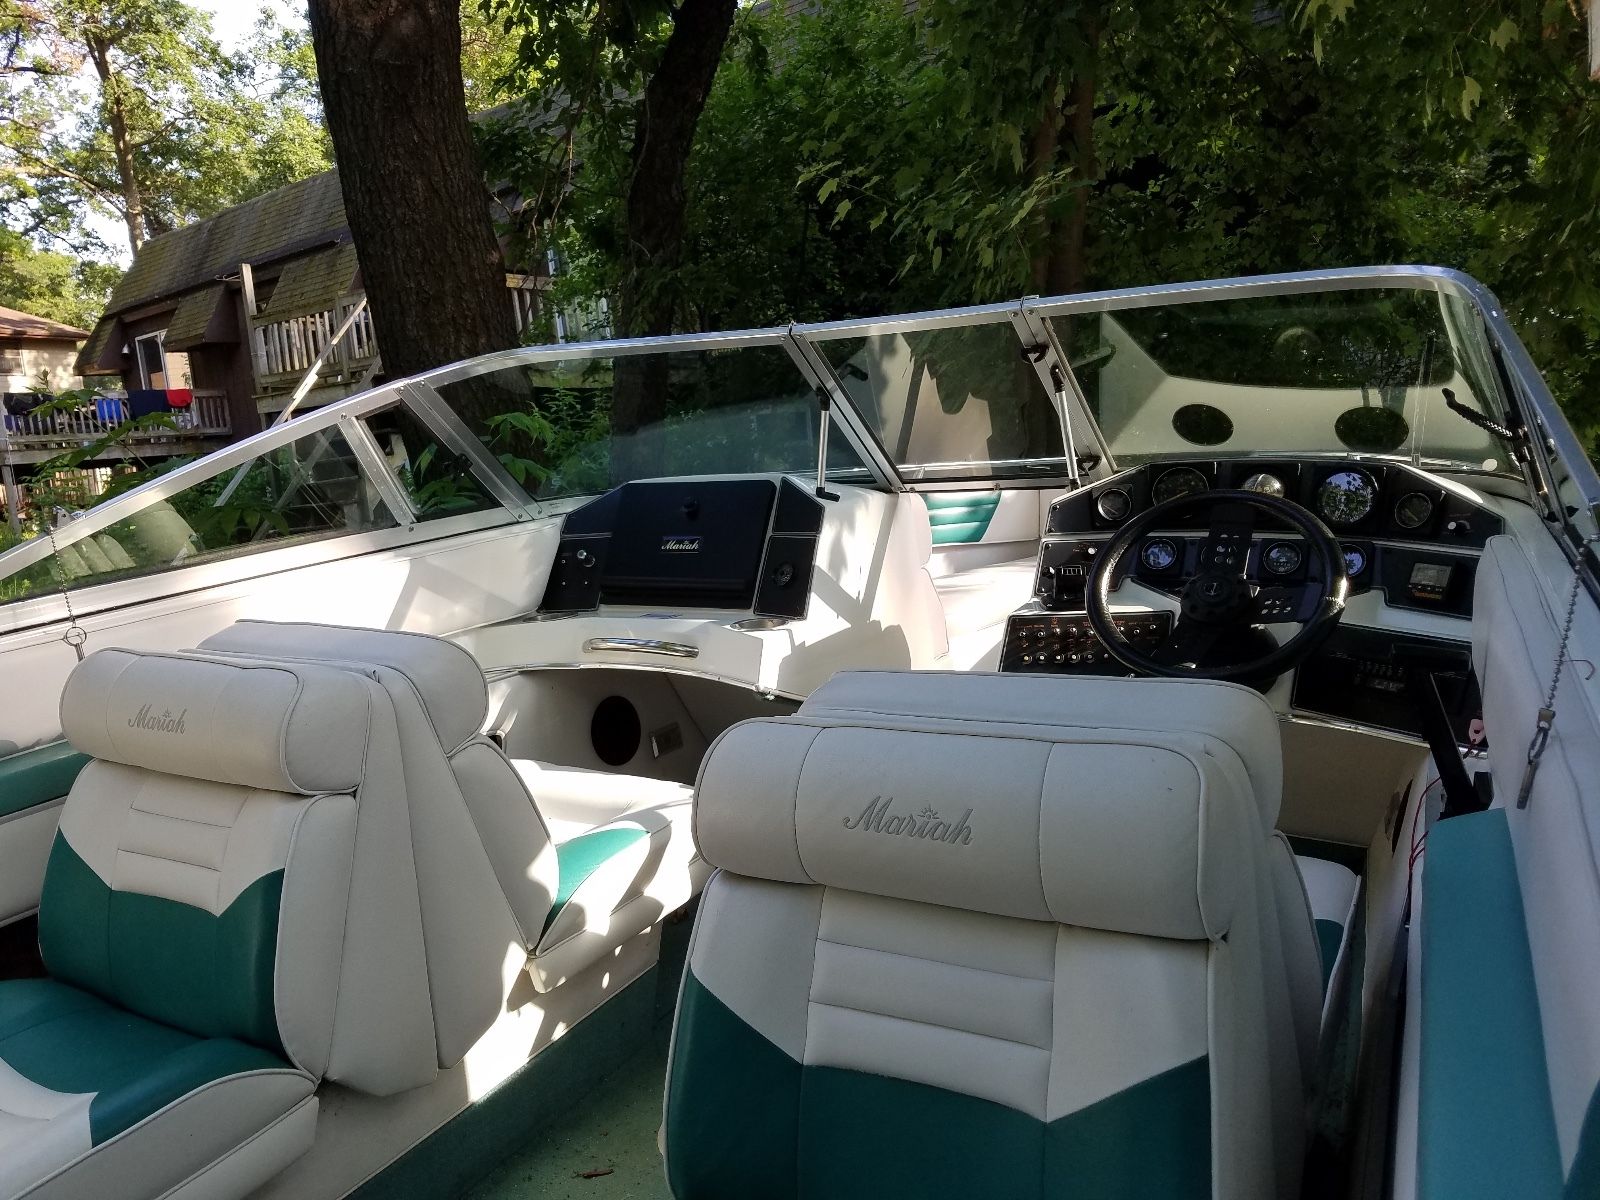 Mariah 1900Z 1991 for sale for $1,600 - Boats-from-USA.com